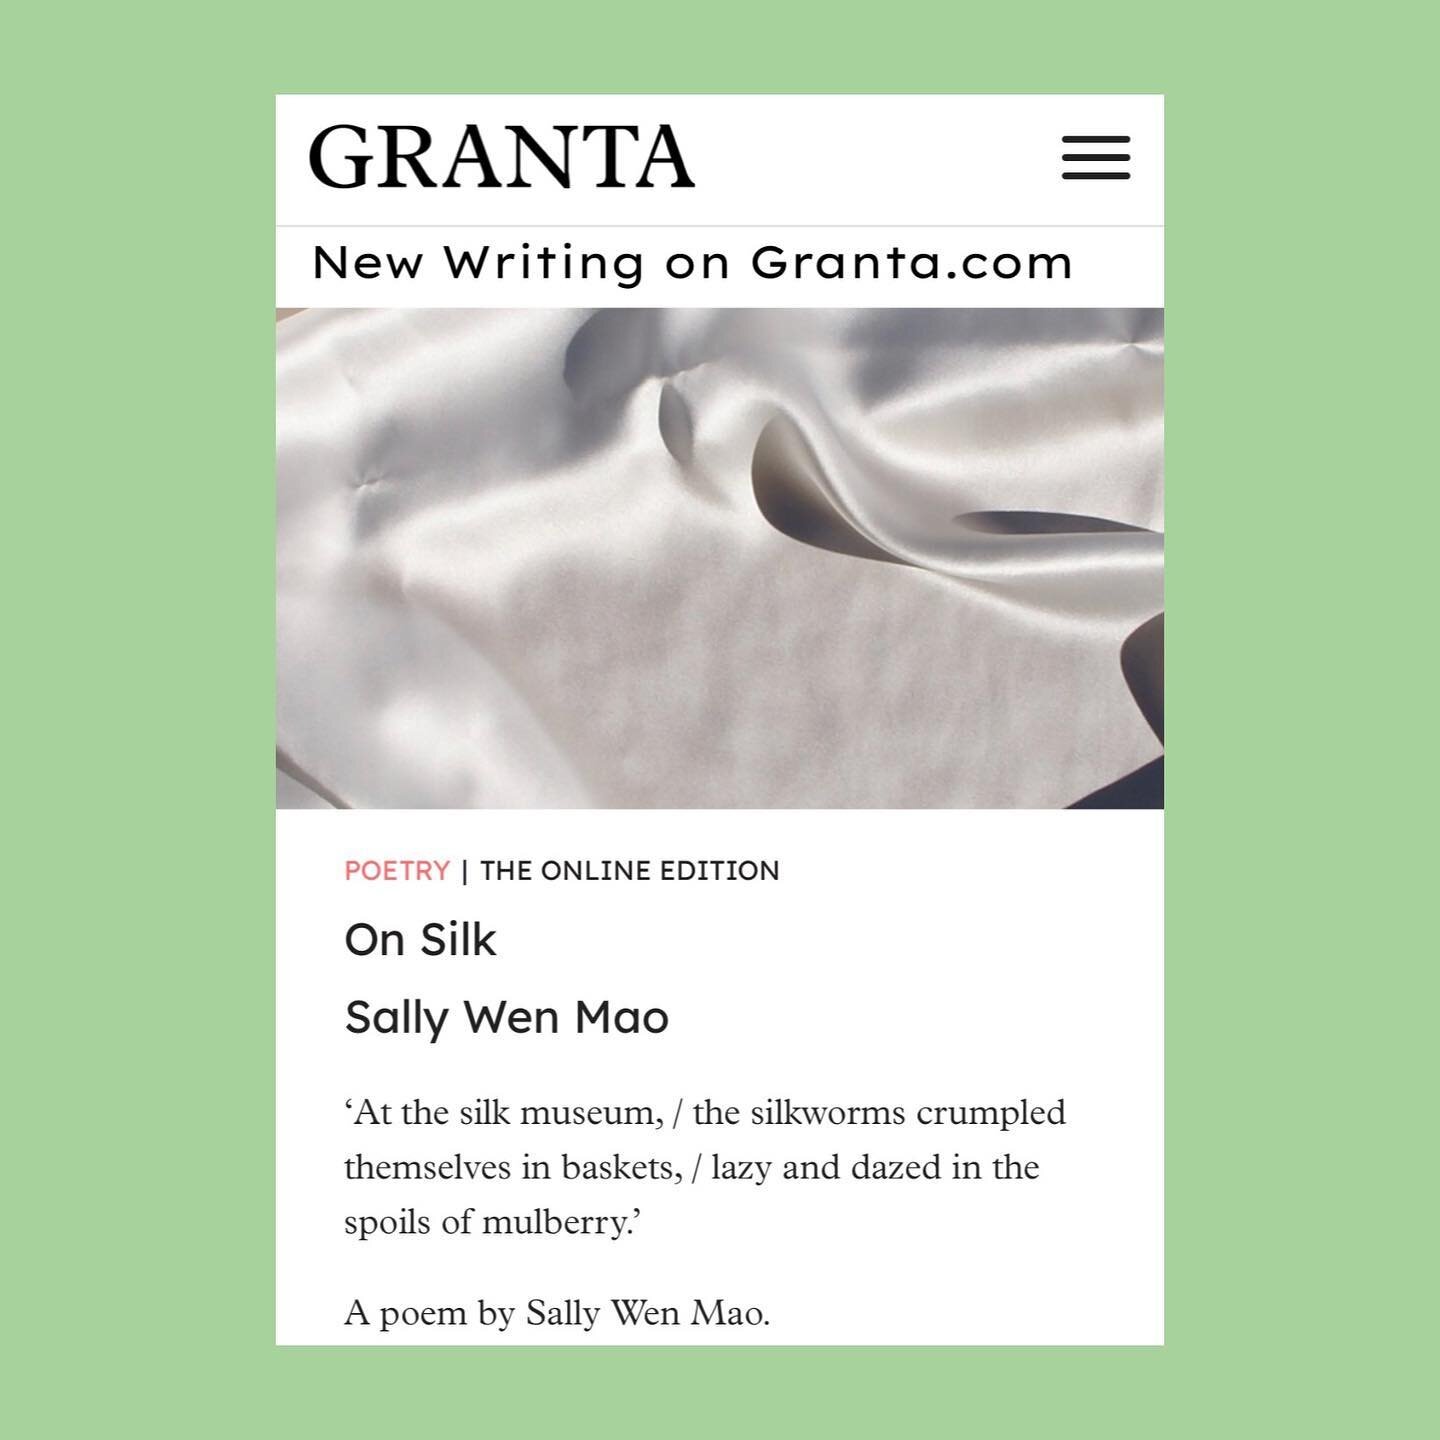 New poem out today on Granta @granta_magazine called &ldquo;On Silk&rdquo; - a long poem from The Kingdom of Surfaces 🎑here&rsquo;s a short excerpt, link in bio!